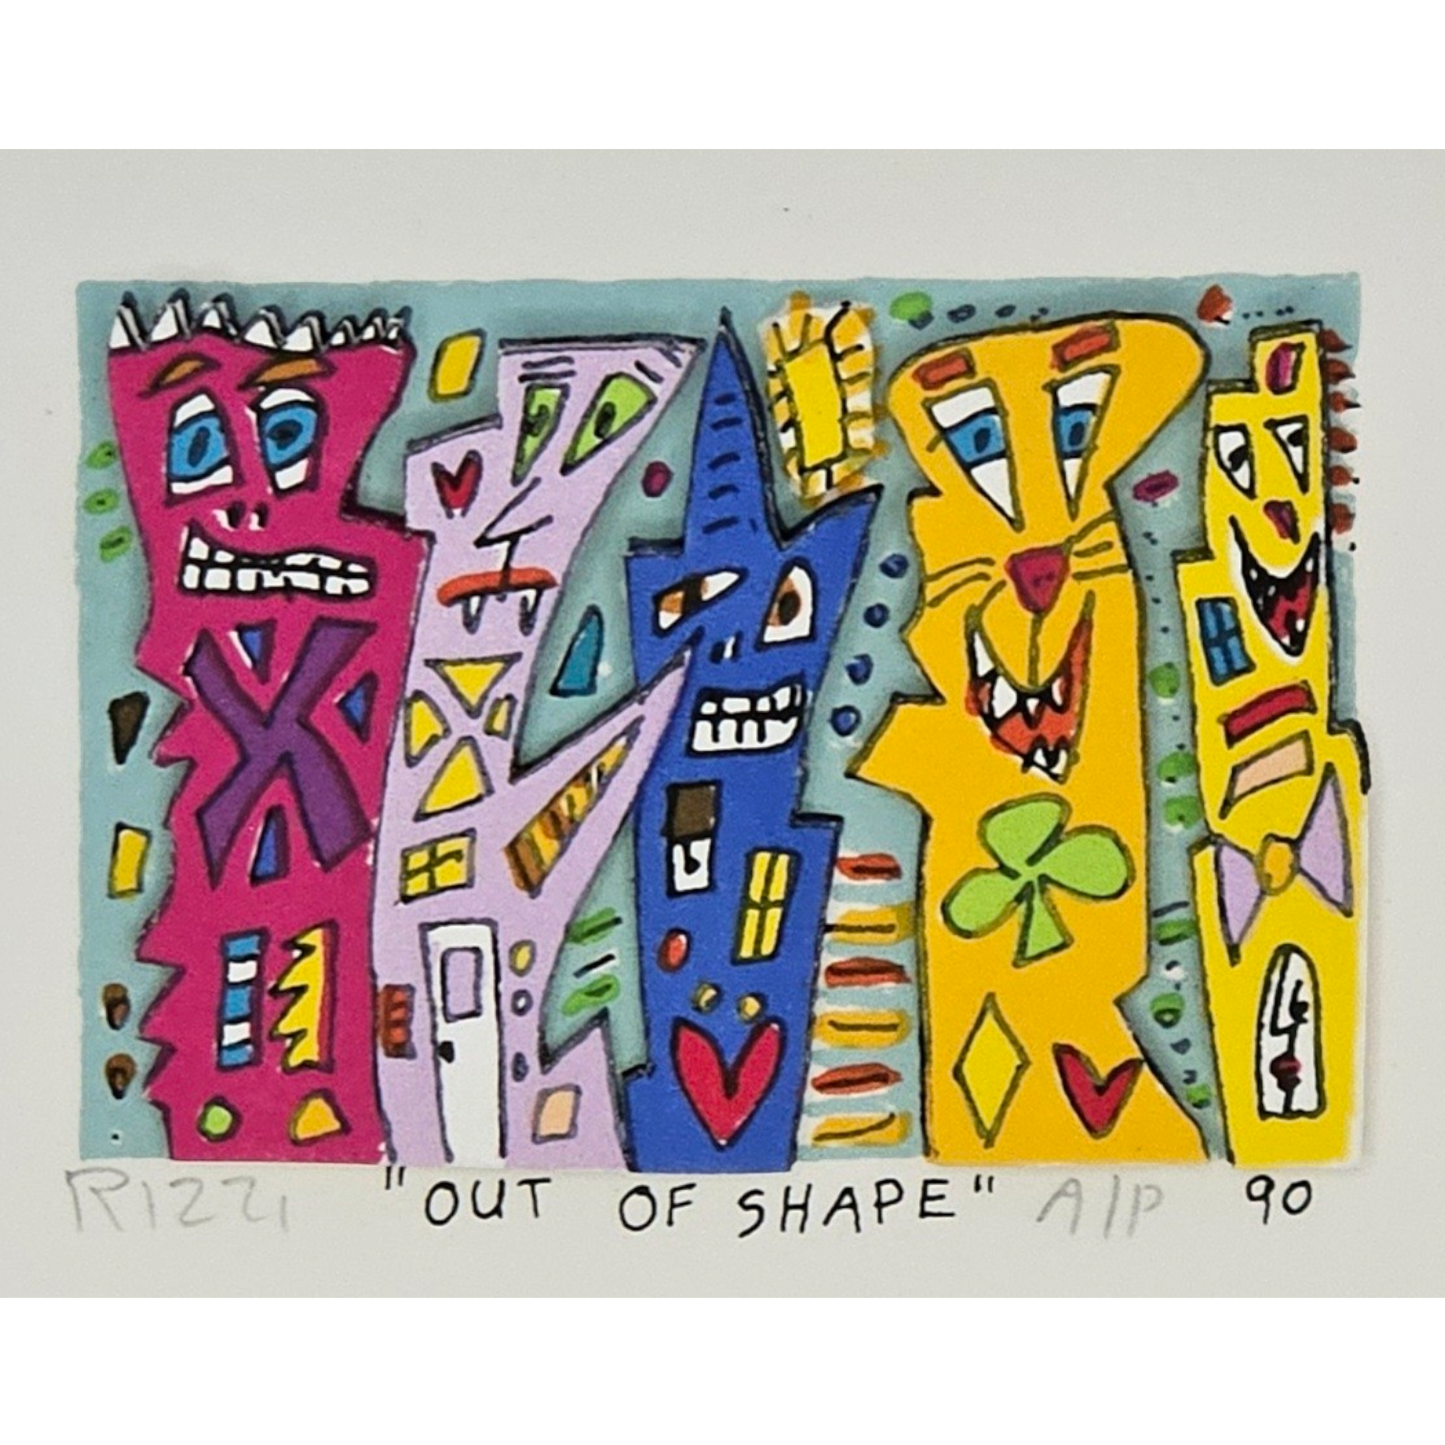 James Rizzi - Out of Shape (1990)